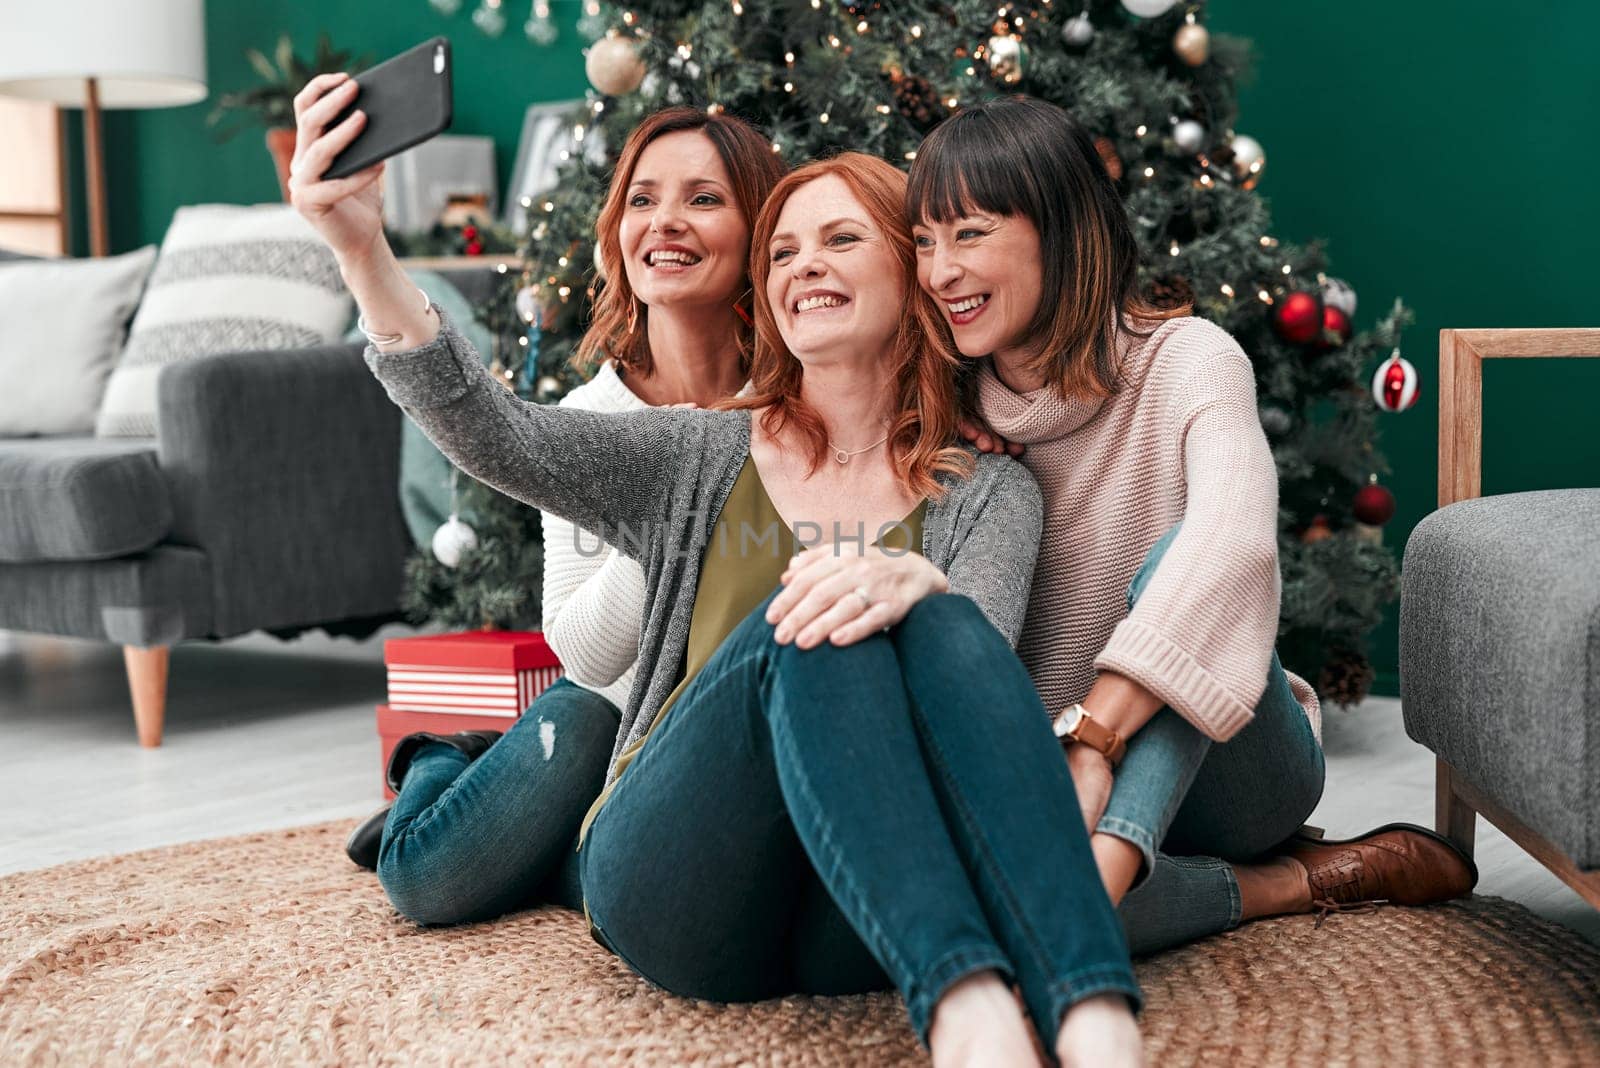 So that well remember forever. three attractive women taking Christmas selfies together at home